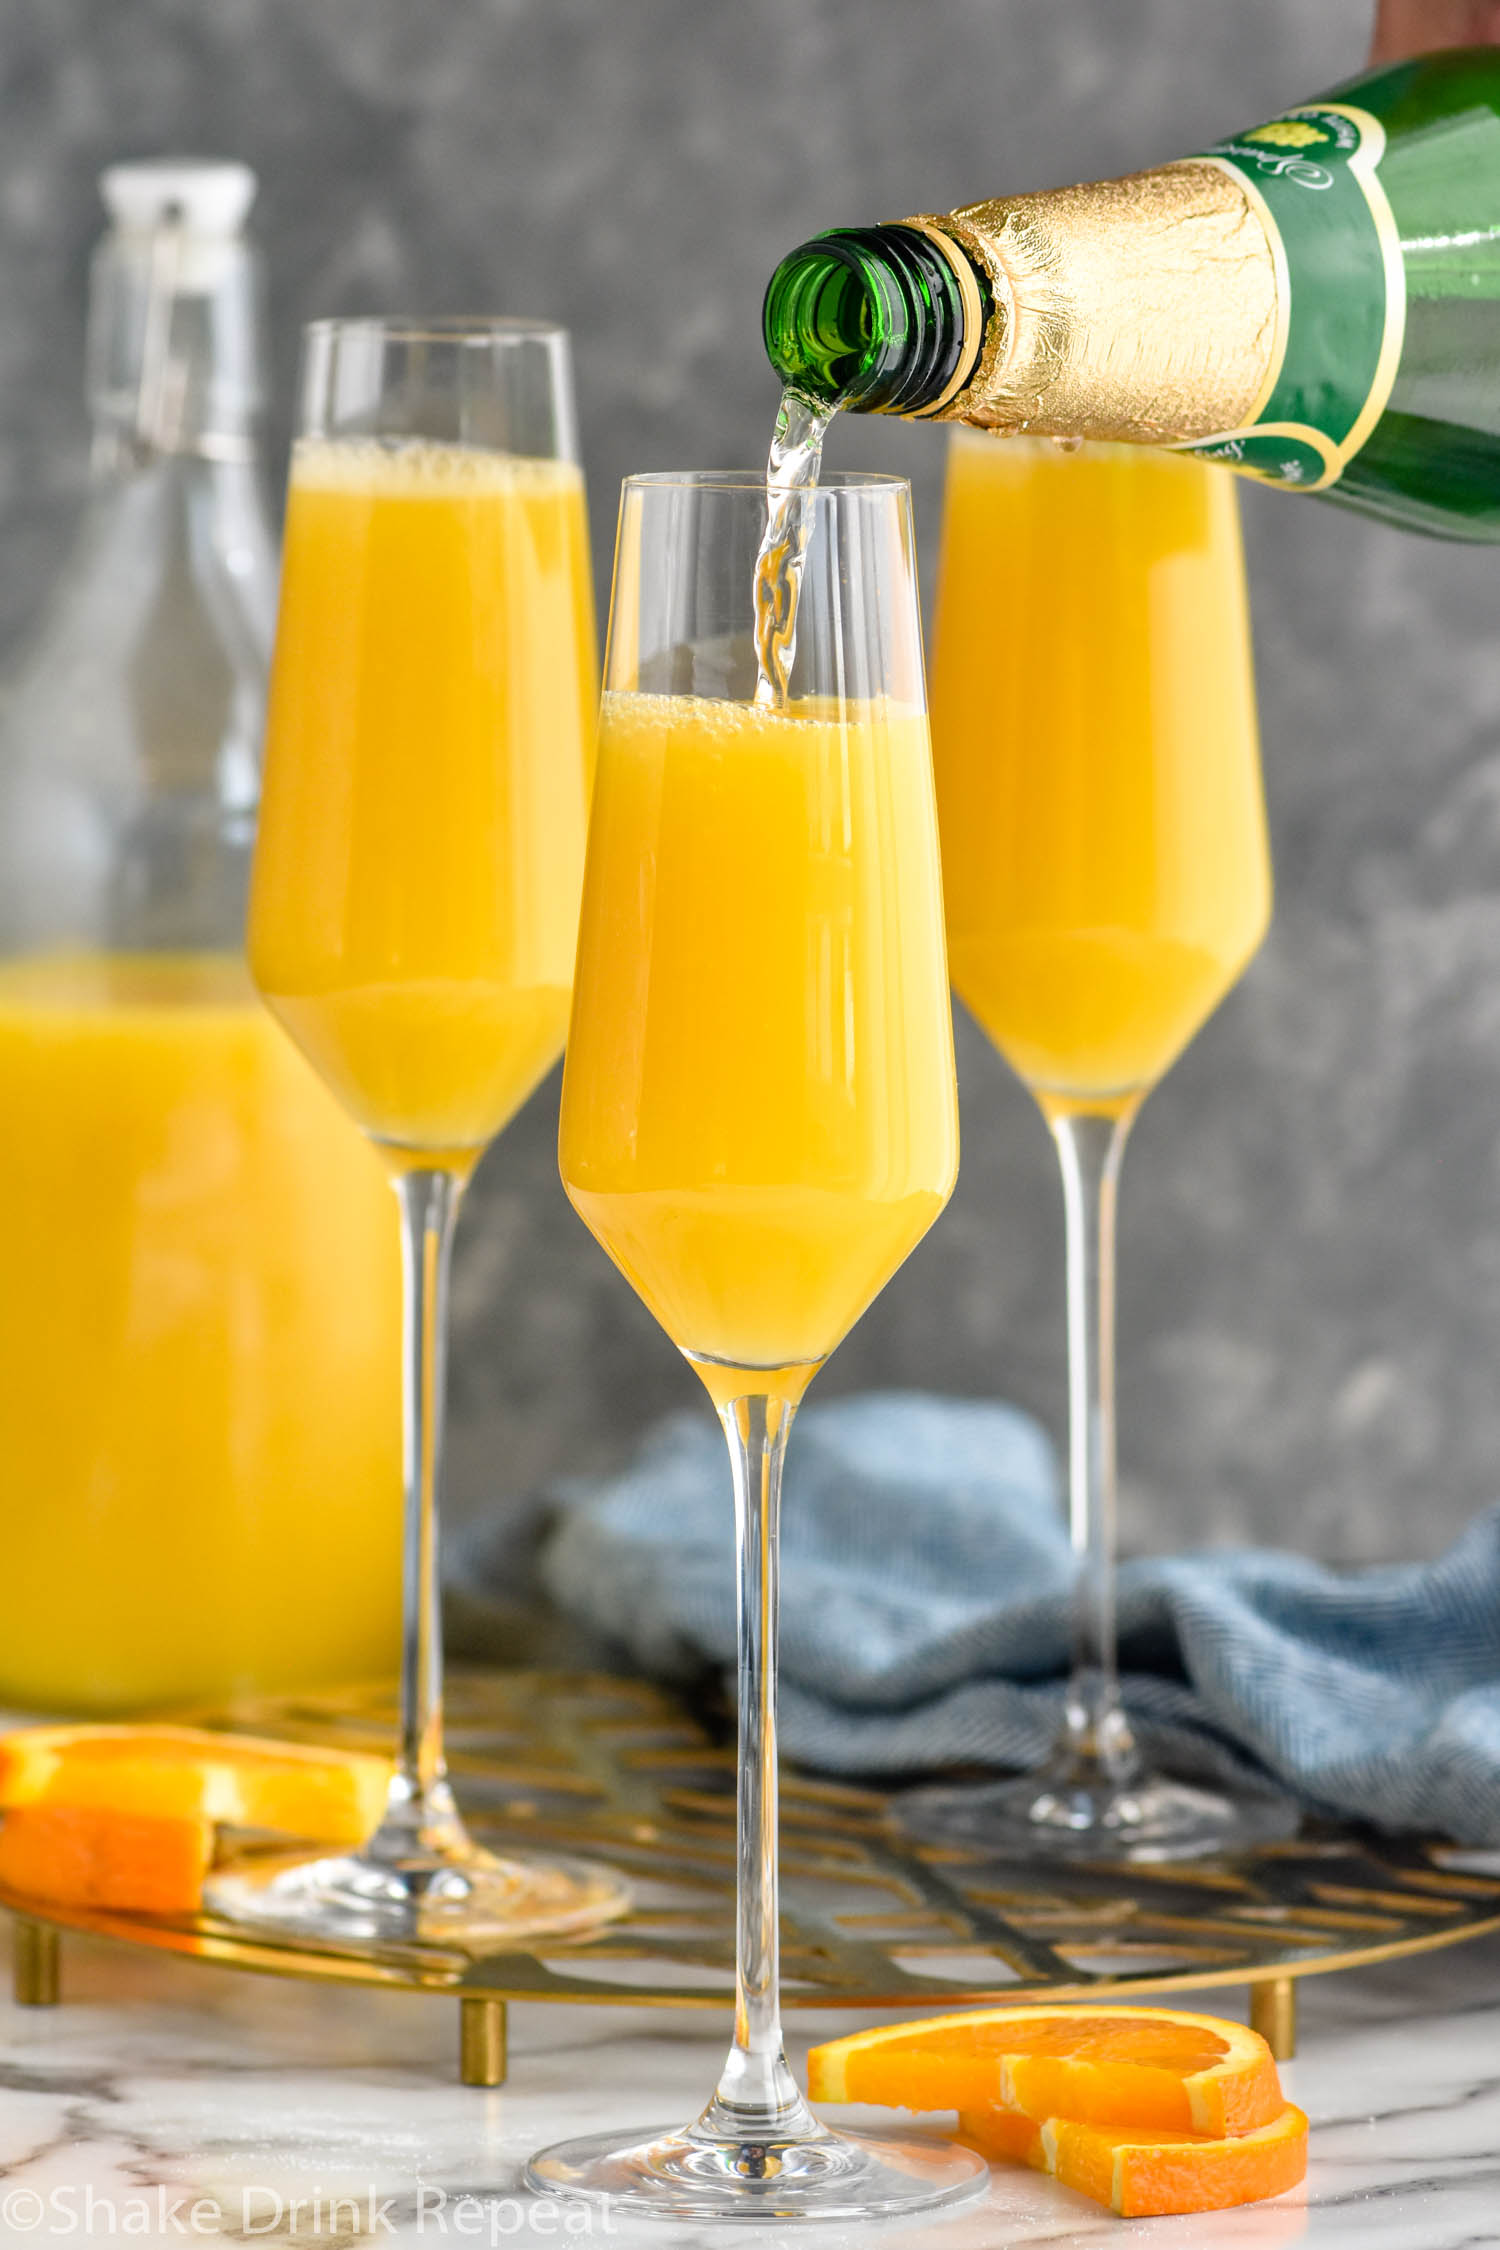 Side view of sparkling grape juice being poured into champagne glasses of orange juice for Non Alcoholic Mimosa recipe. Orange slices and bottle of orange juice beside.